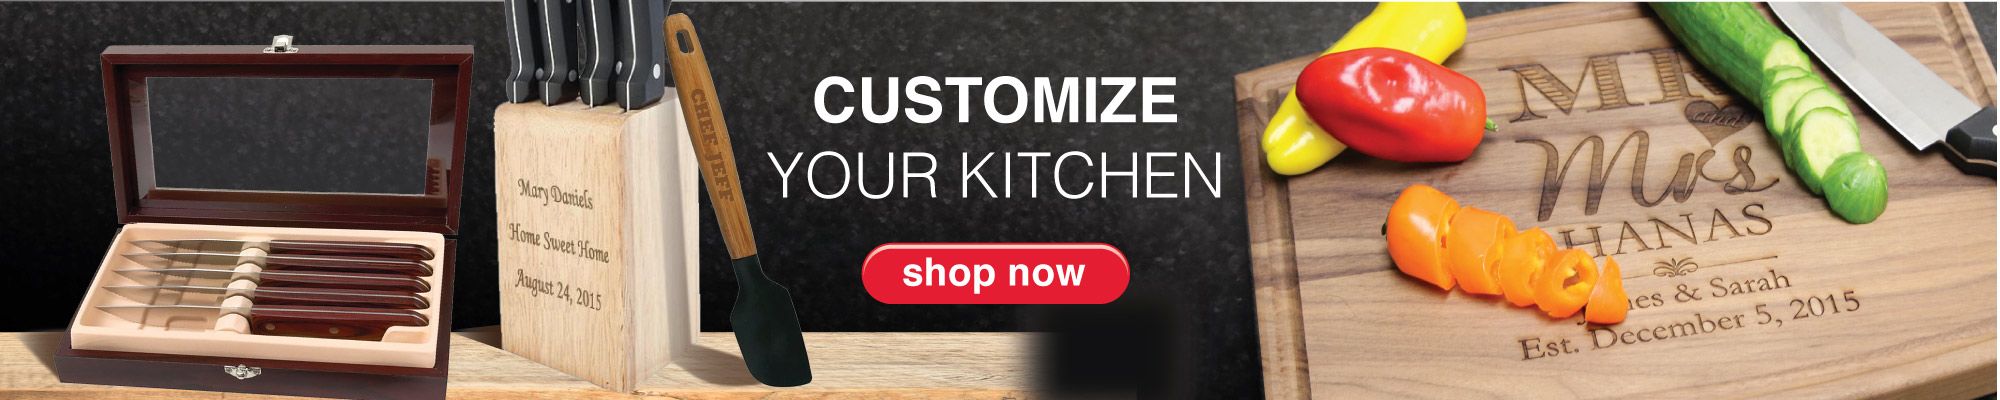 Customize your kitchen